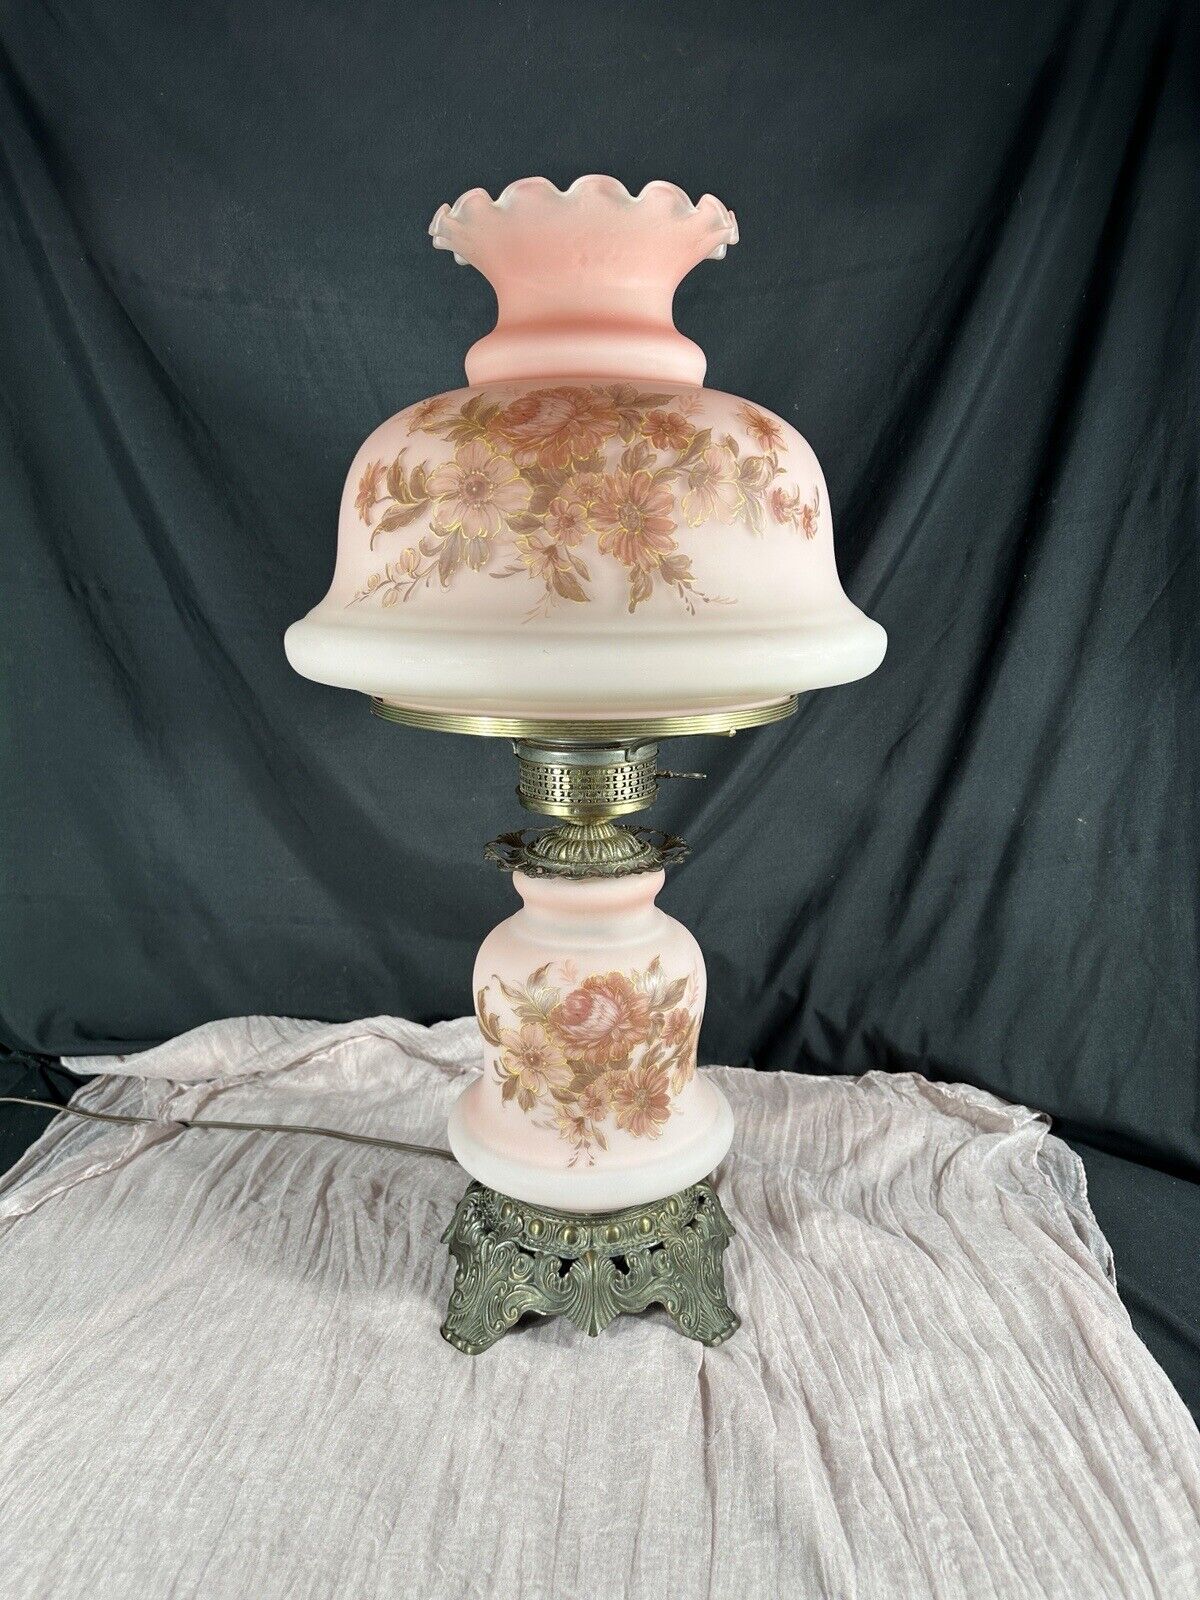 GWTW VINTAGE 3-WAY QUO1ZEL HAND PAINTED FROSTED GLASS FLORAL HURRICANE LAMP 26”H